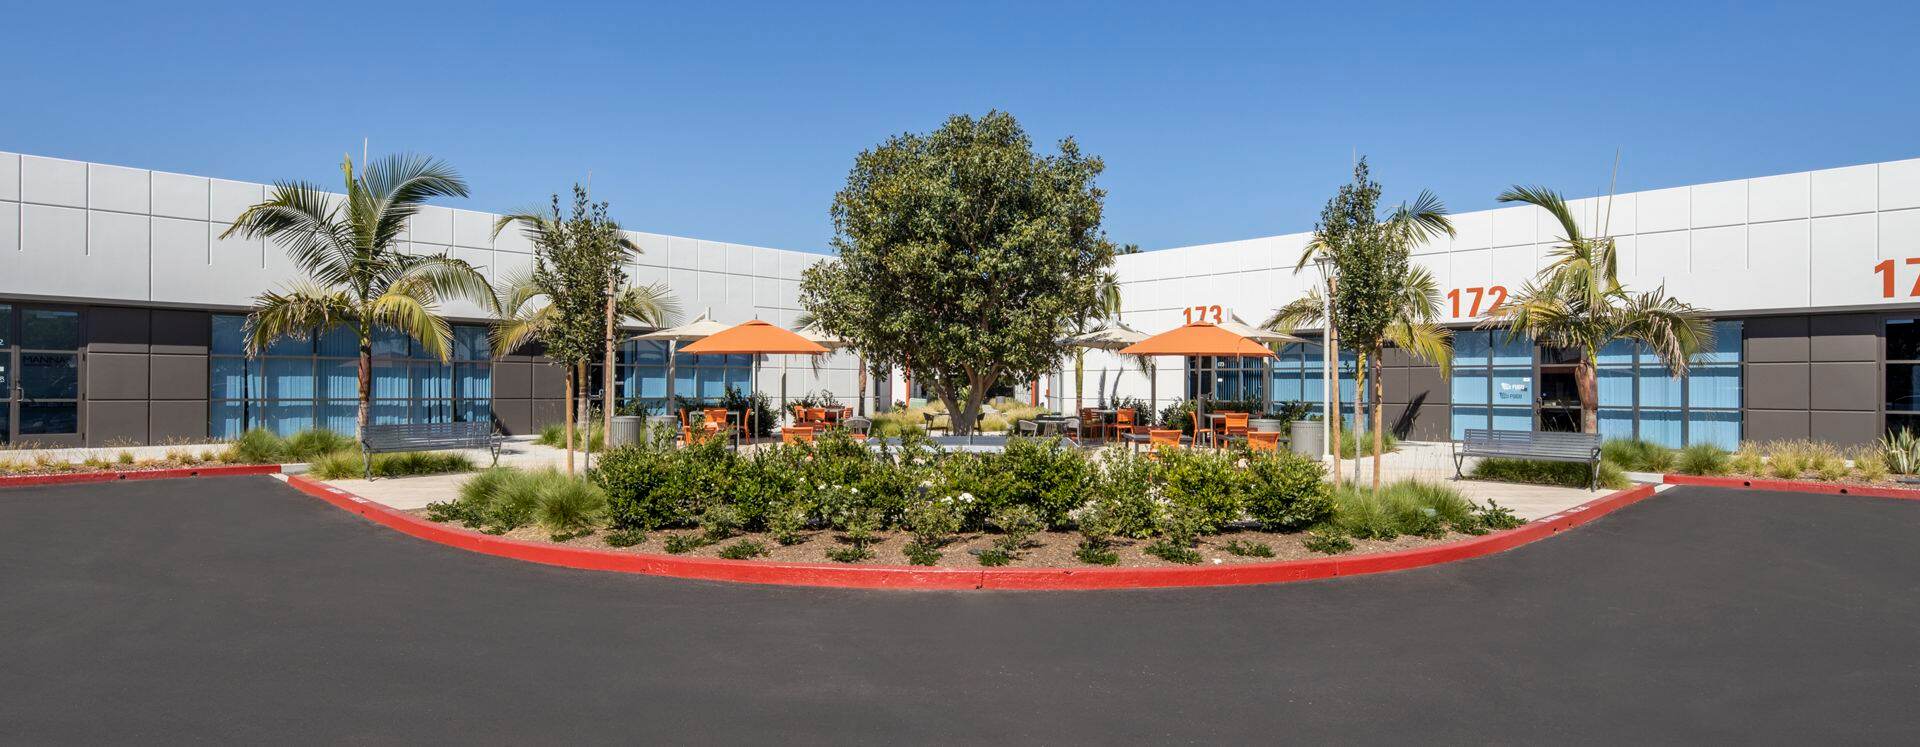 Exterior view of 16 Technology at Technology Link in Irvine, CA.